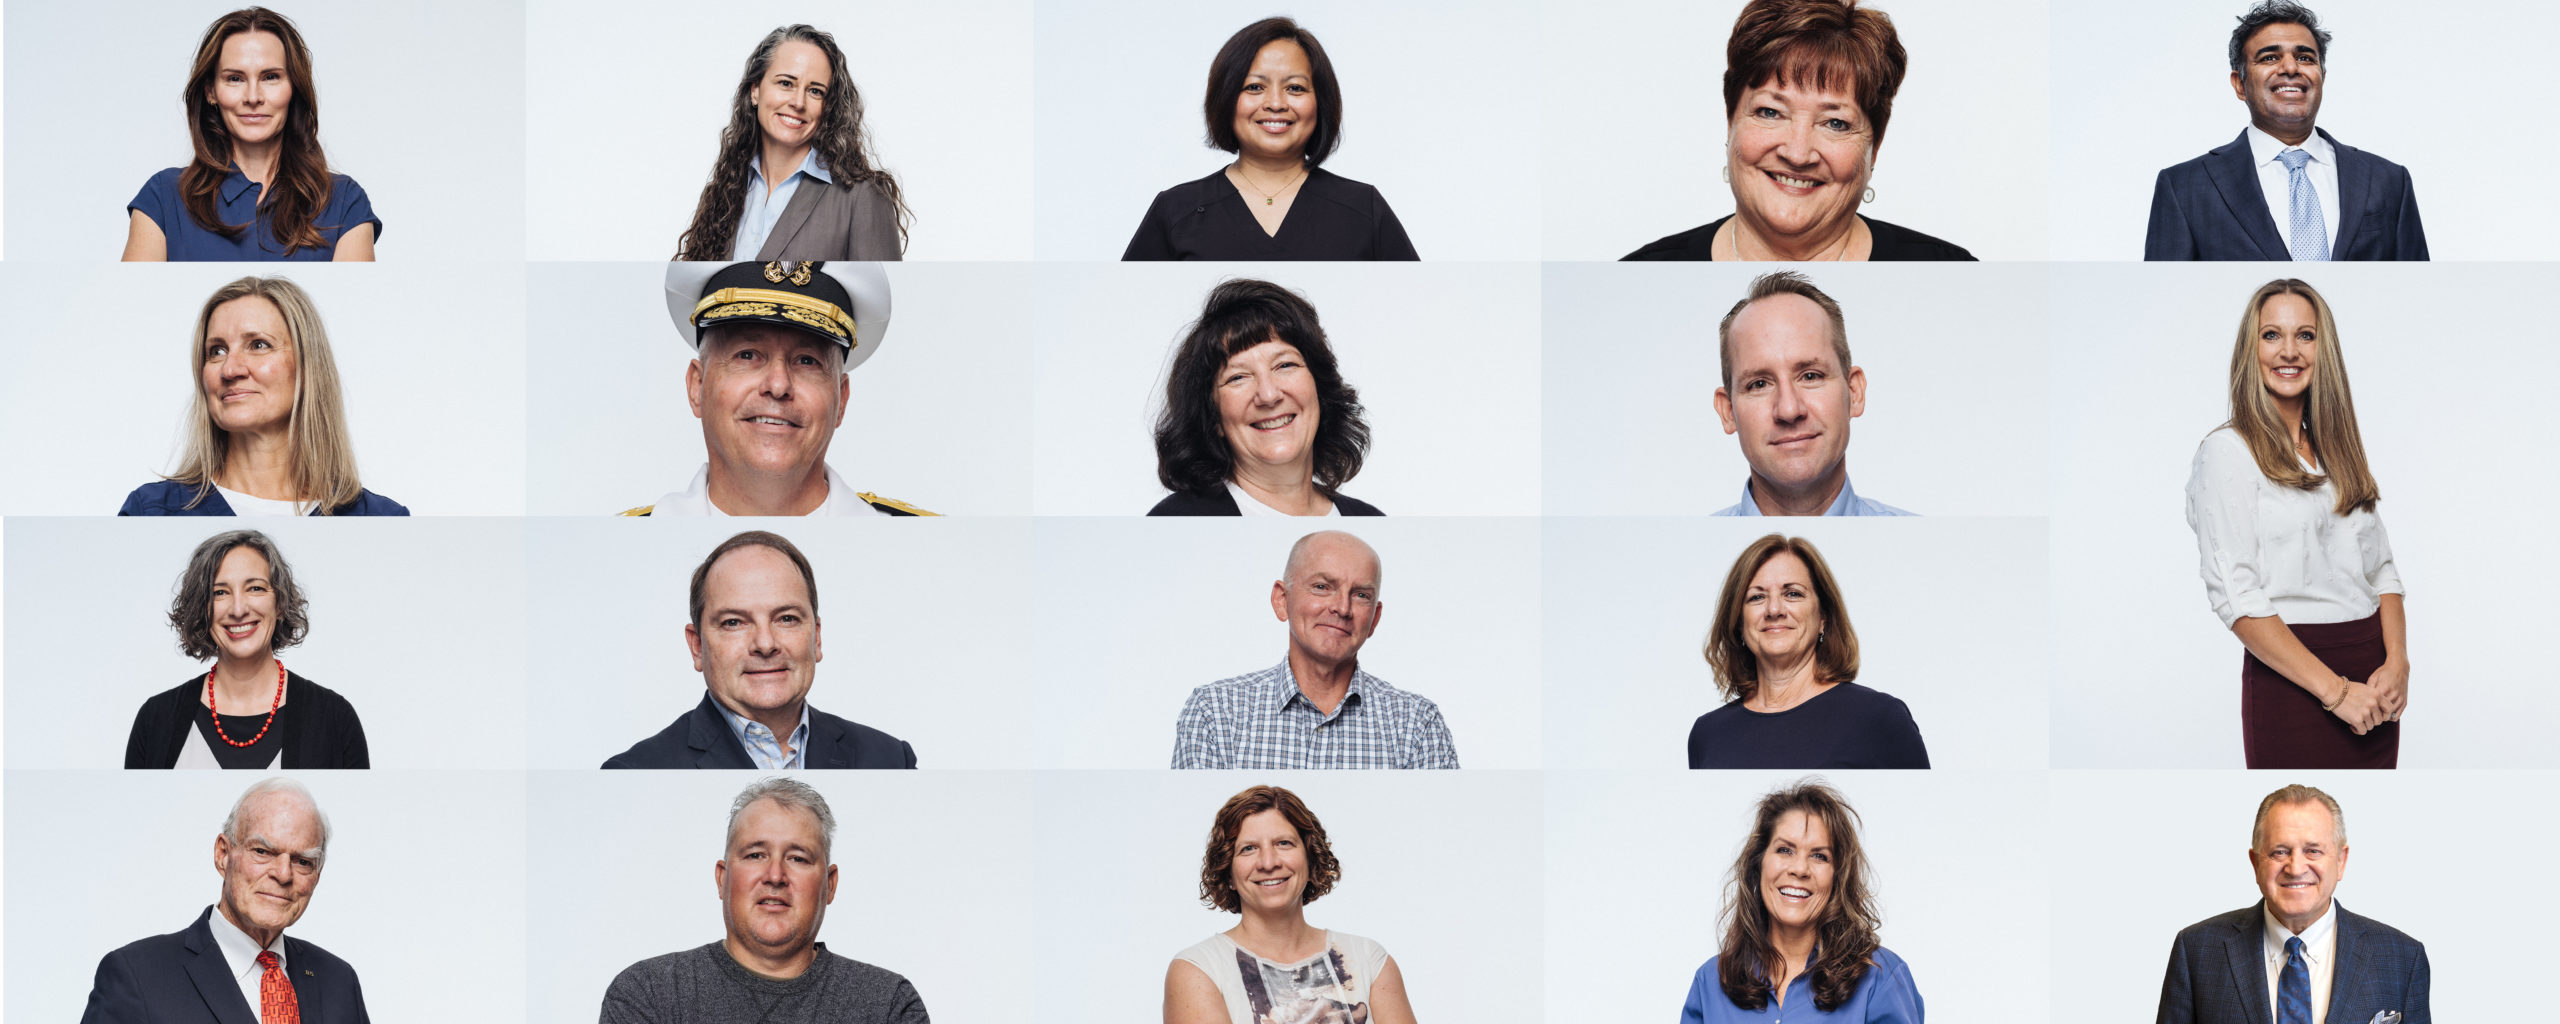 Meet the individuals and organizations who are working toward a healthier state, these are the 2021 Healthcare Heroes.